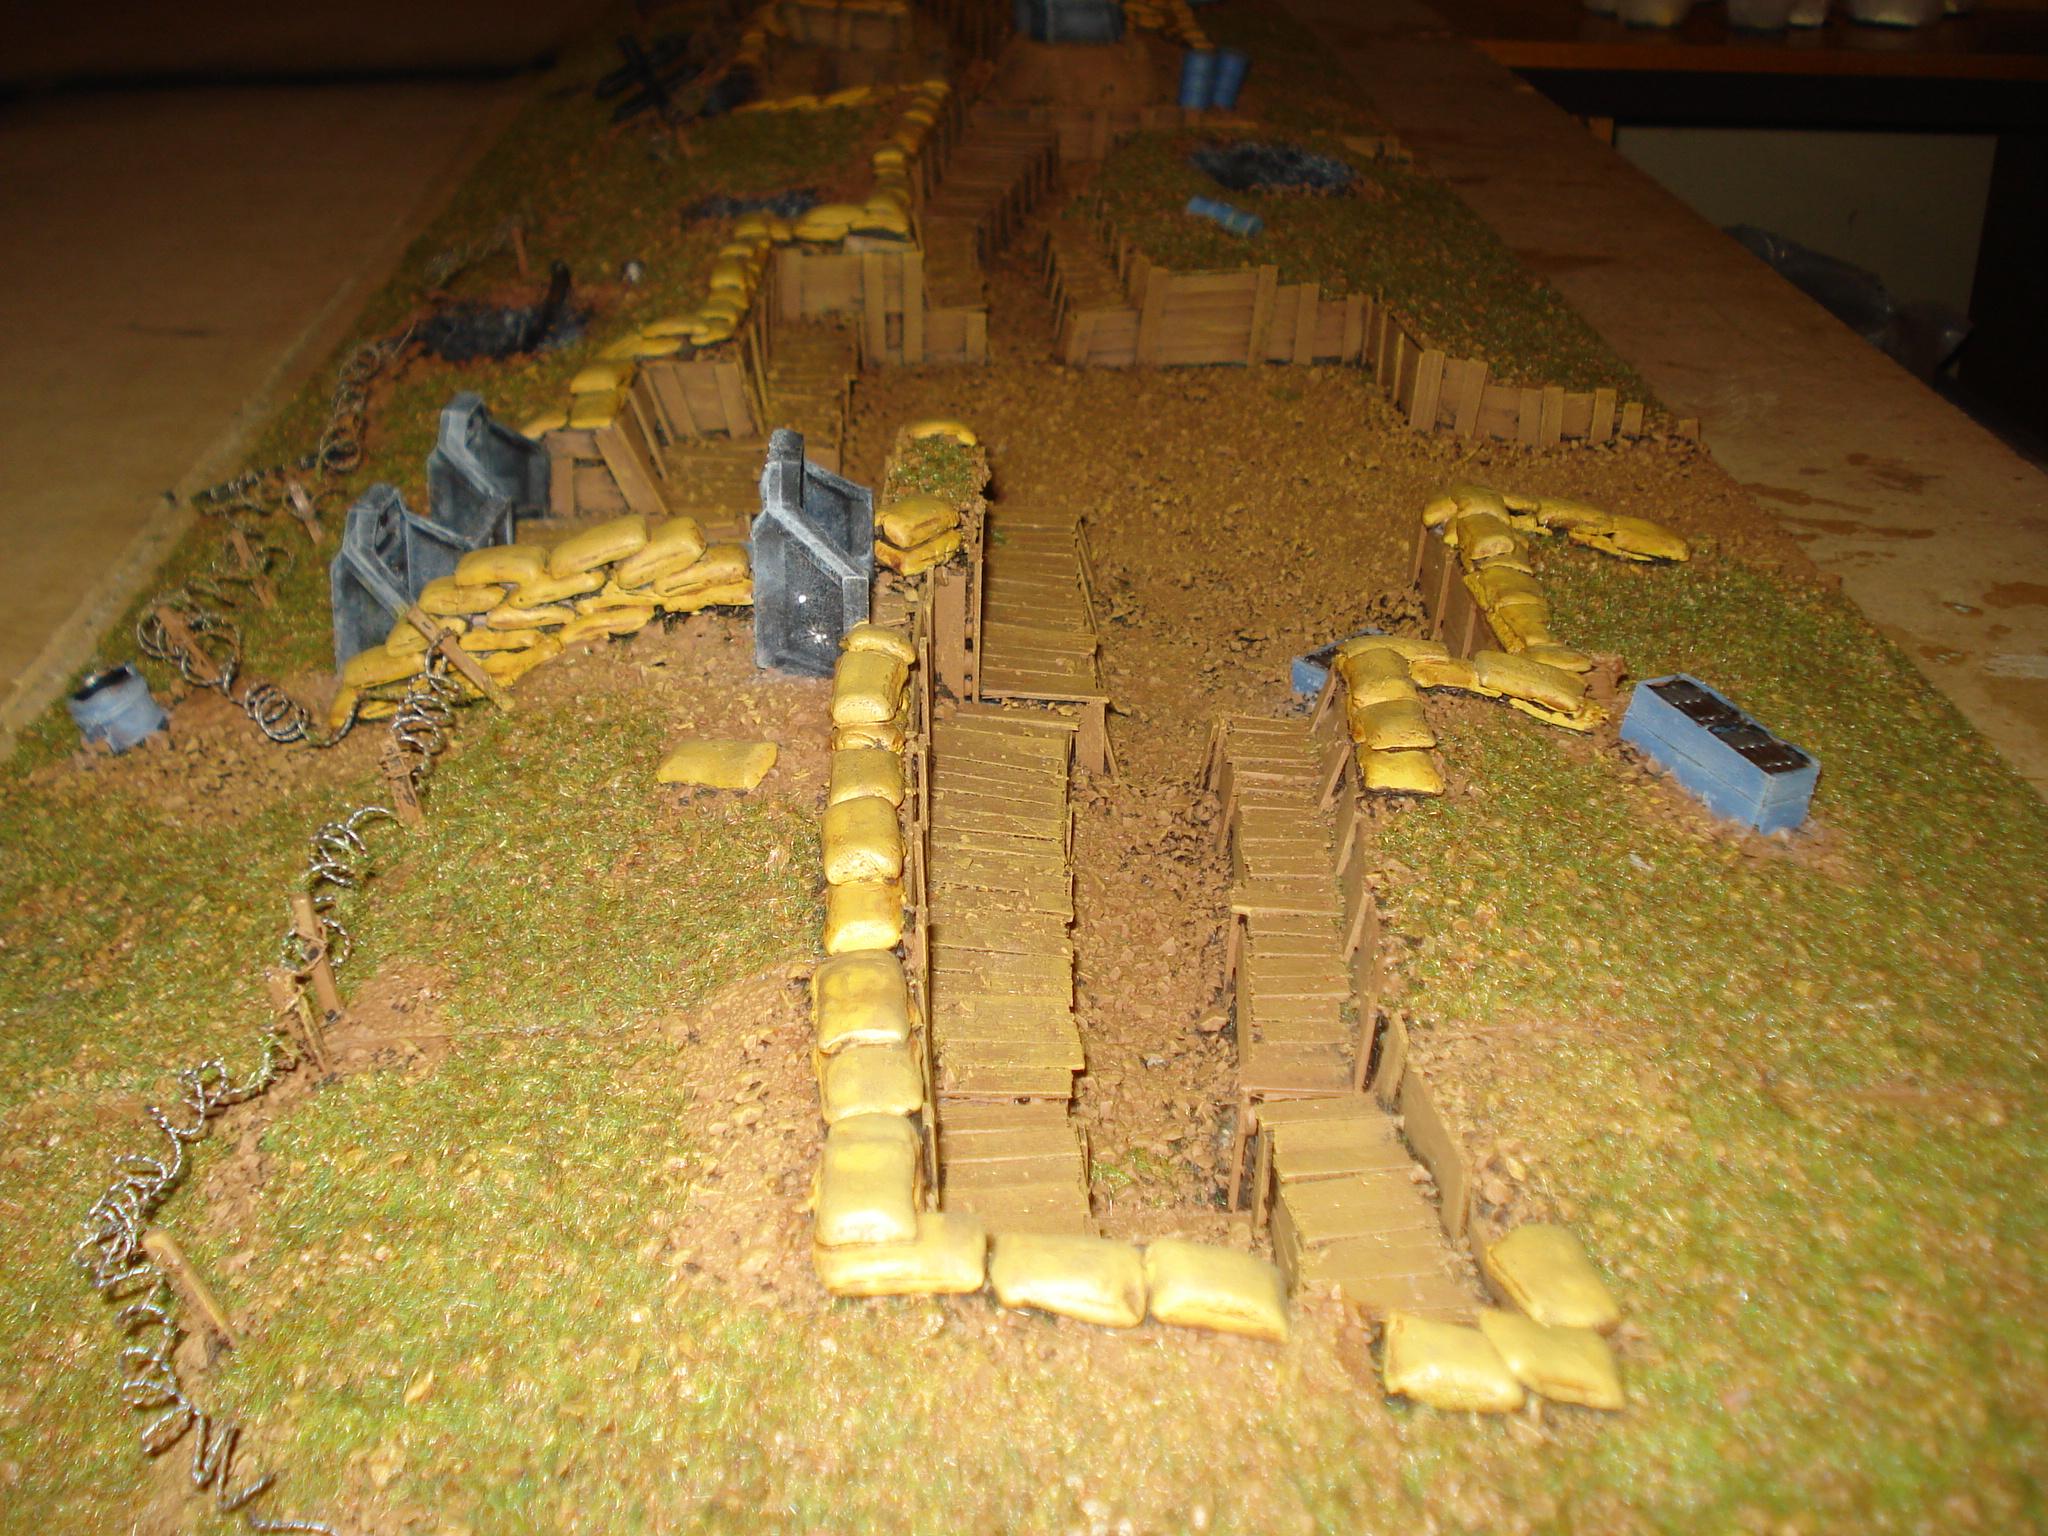 Terrain, Trenches